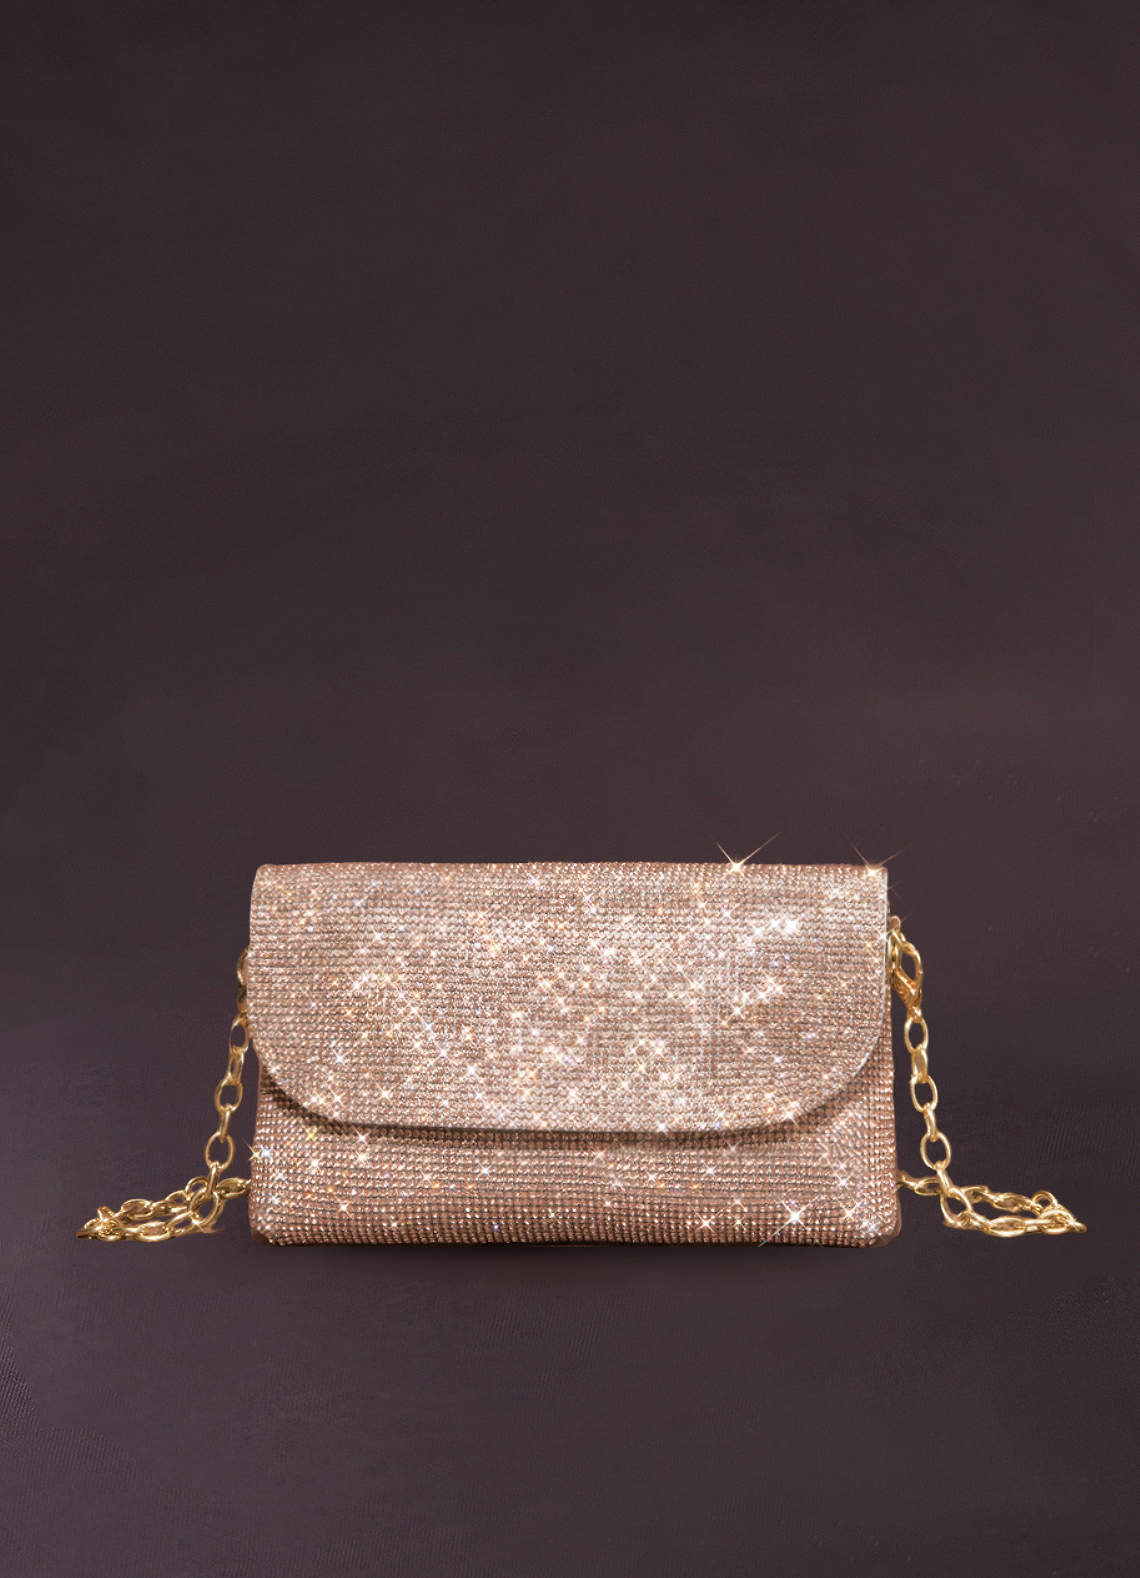 Buy Rose Gold Evening Bag Online In India - Etsy India